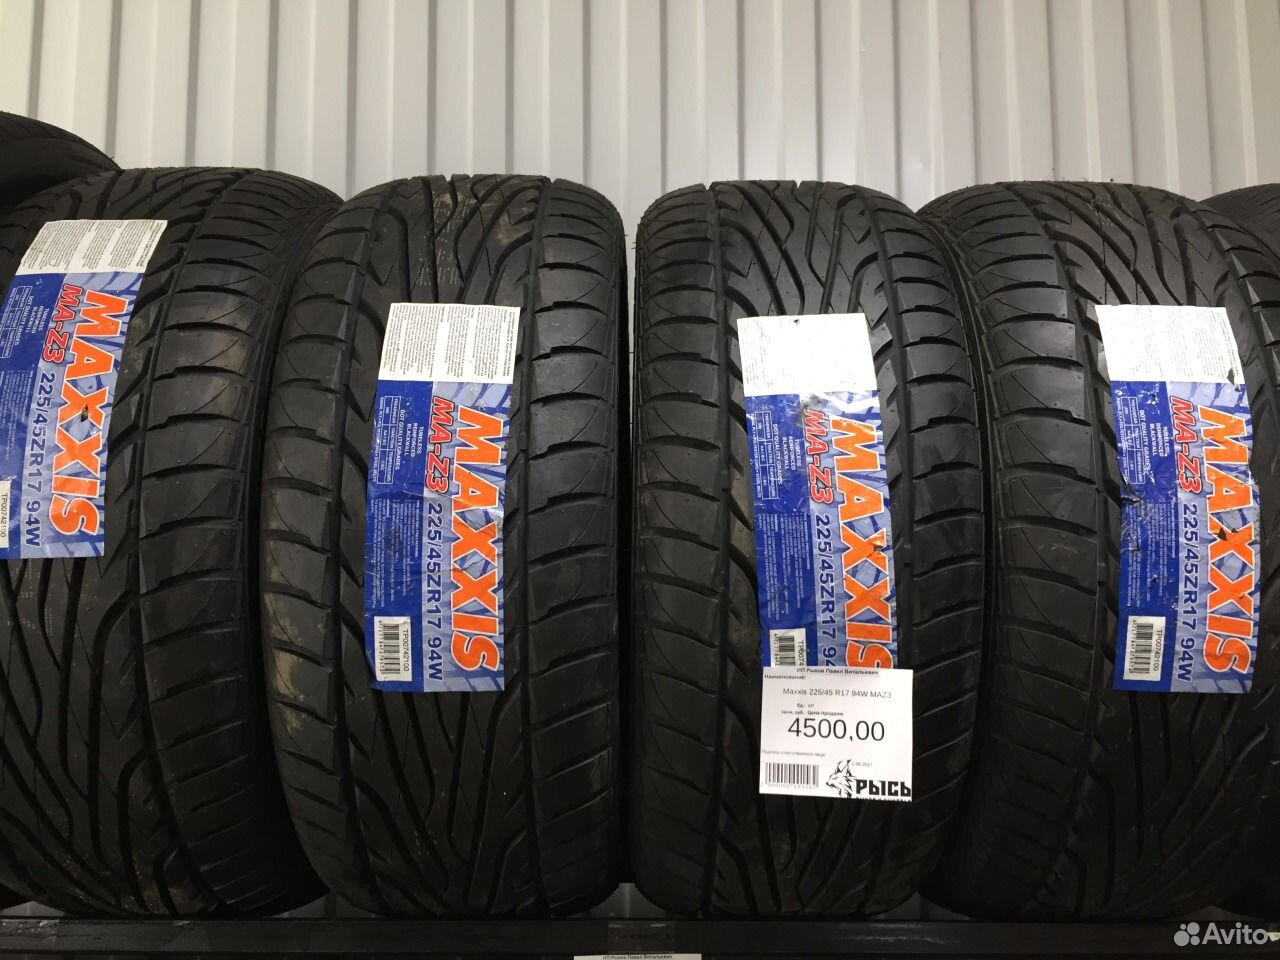 225/45r17 Maxxis Victra ma-z1 94w. Maxxis 225 45 r17 лето. Maxxis 205 50 17 лето. Presa 225 45 r17. Резина 215 60 r17 лето